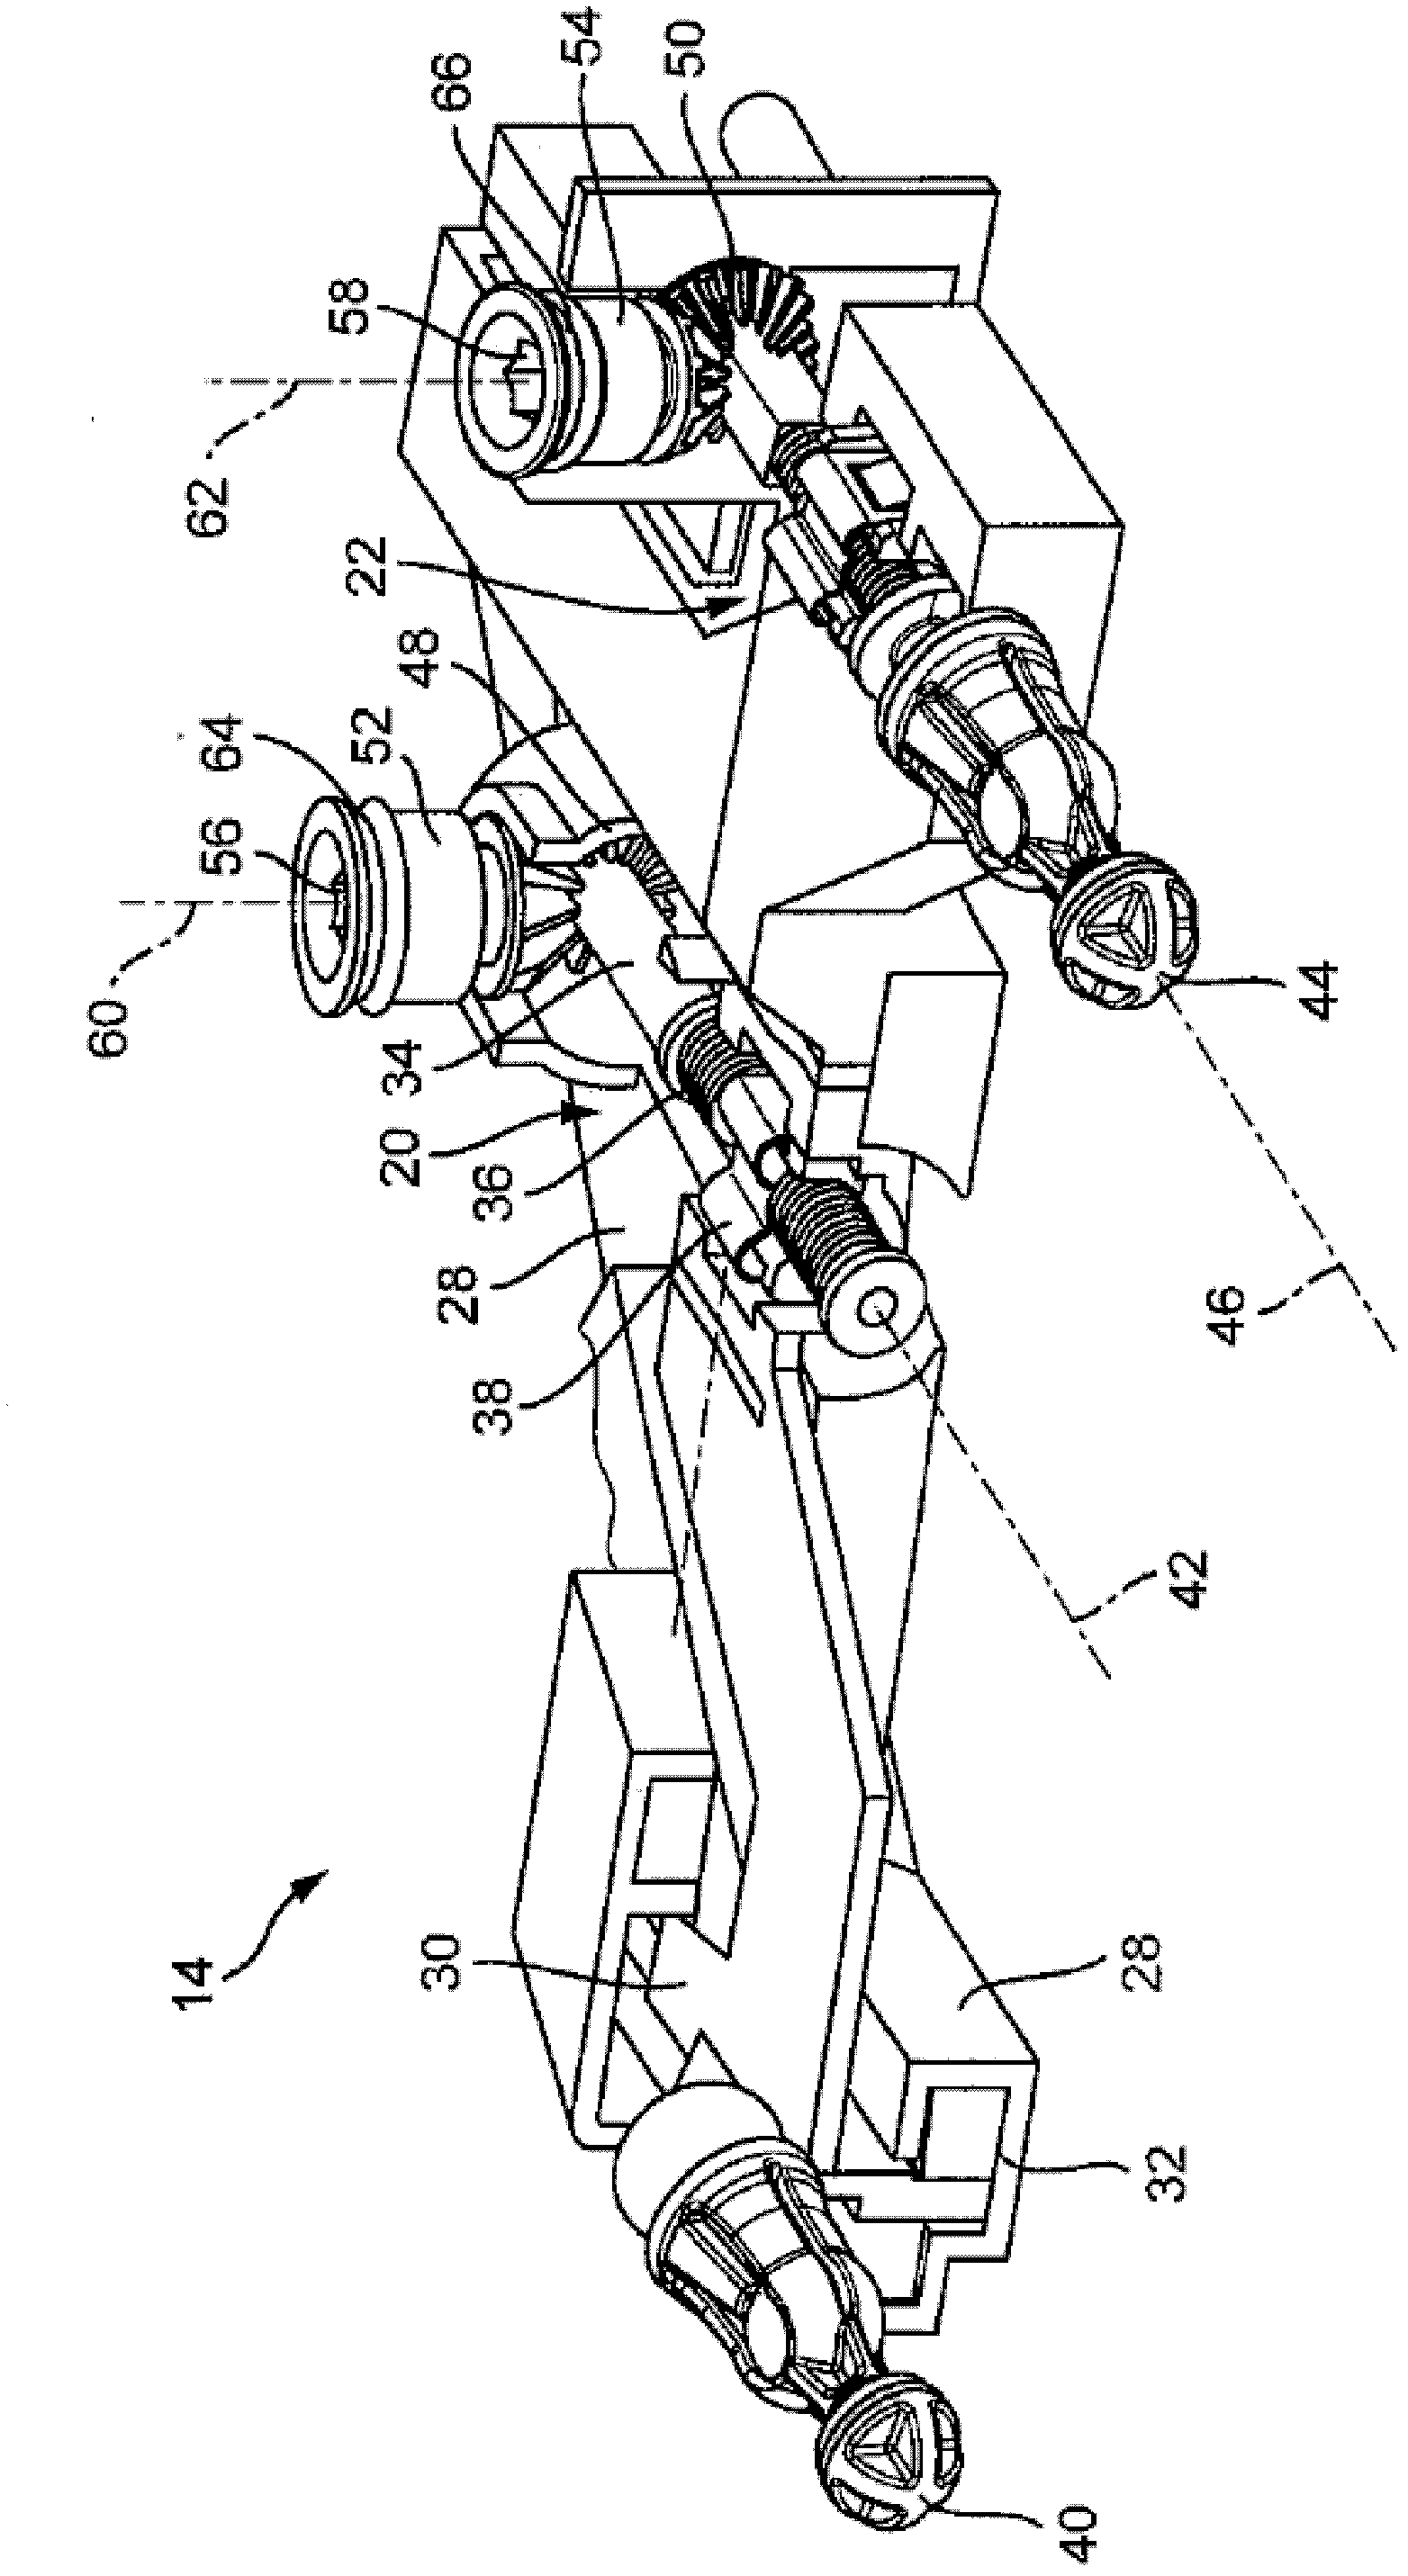 Compact and vertical adjusting unit for headlight mounted in vehicle